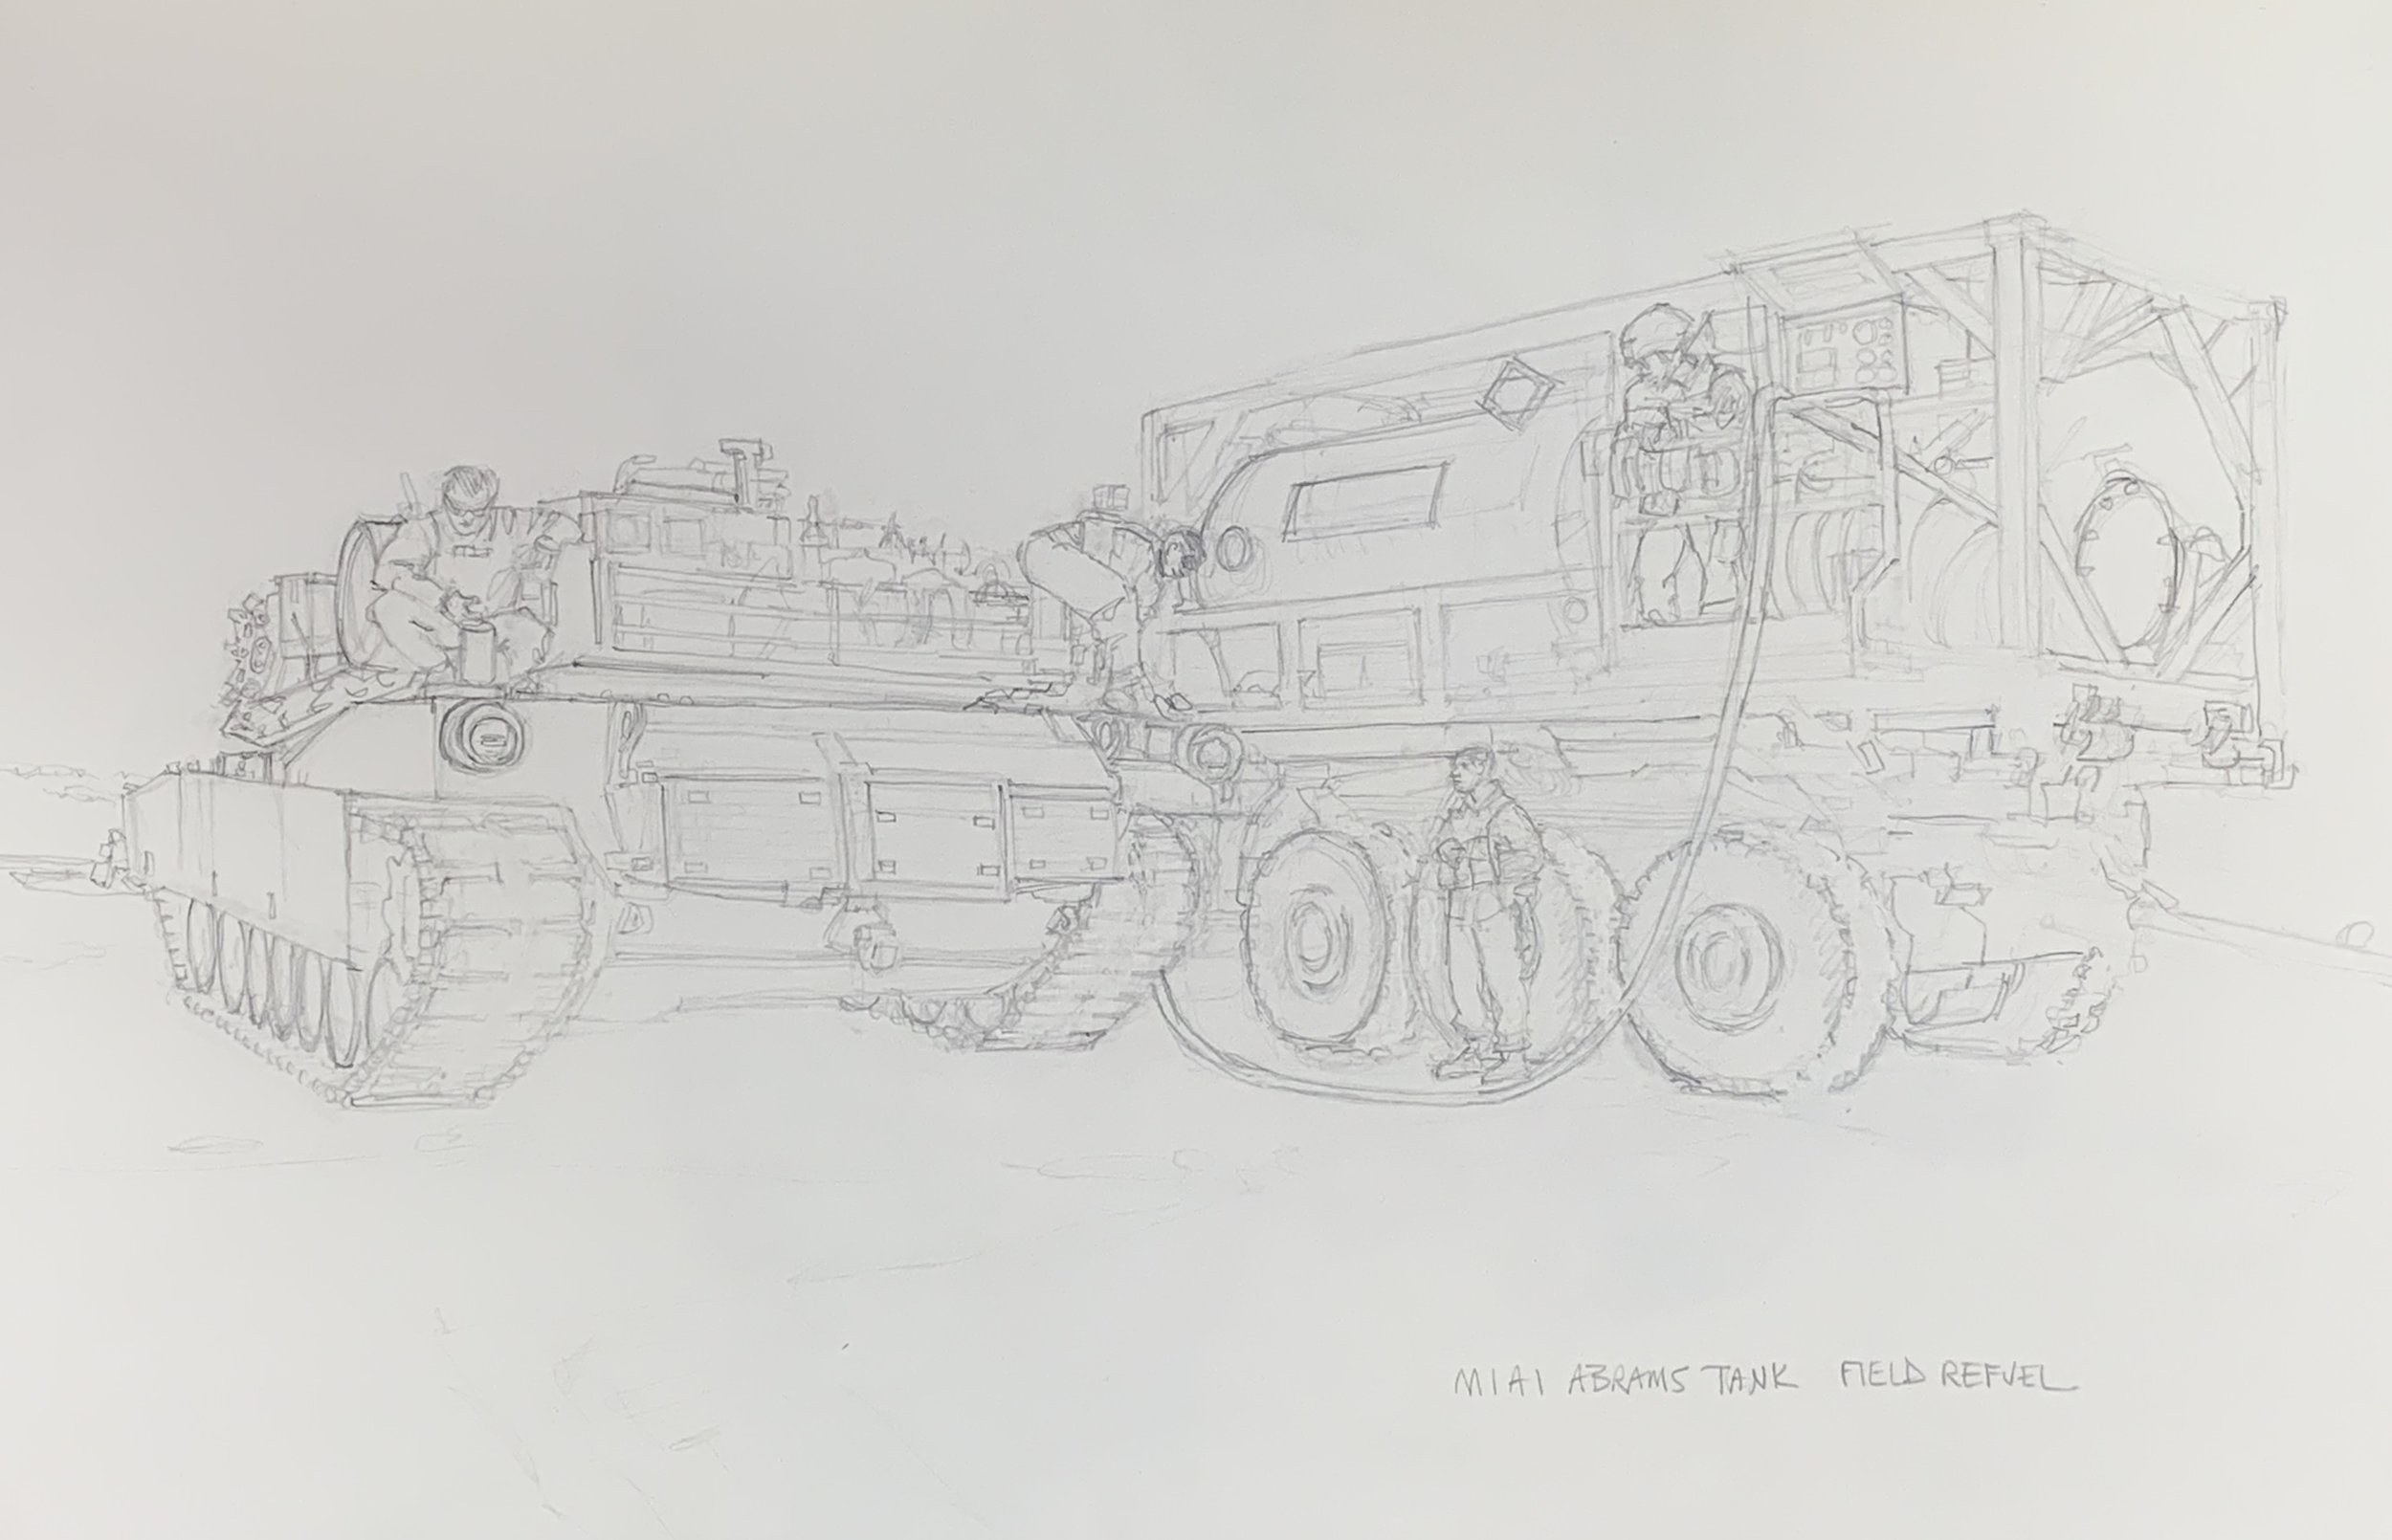 Sketch for a painting: Refueling an M1A1 Abrams 120mm Tank in the field.  1st Marine Division, 1st Tanks, Bravo Company